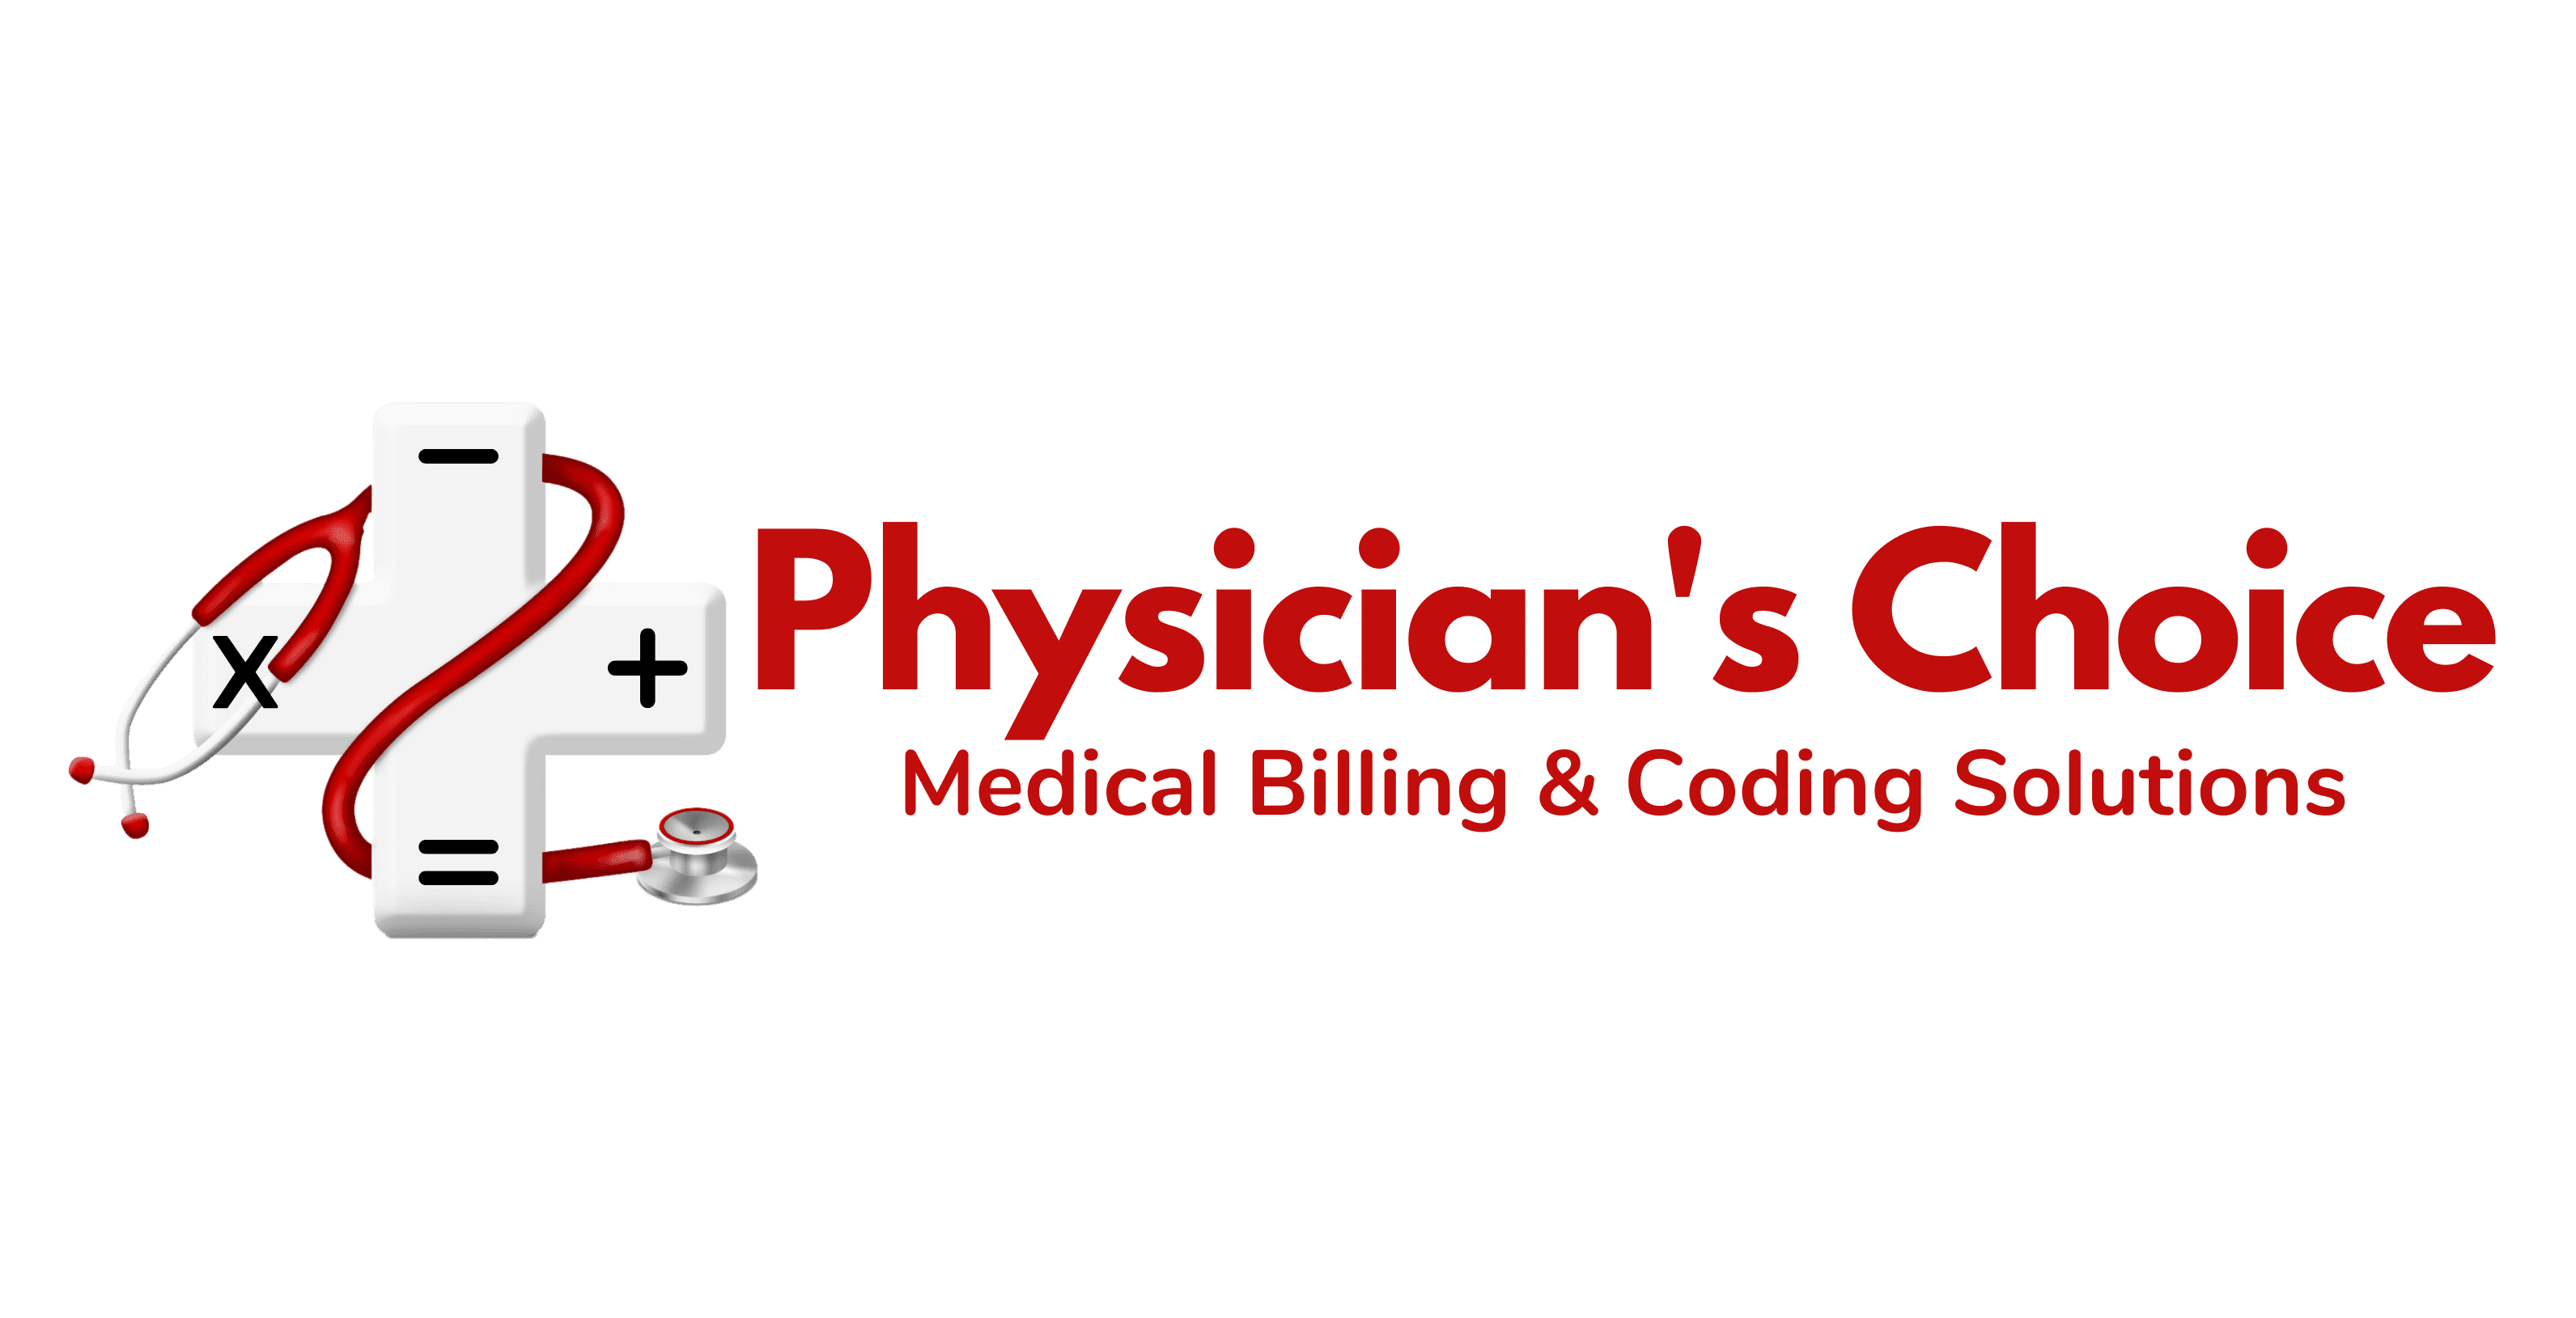 Physician's Choice Medical Billing and Coding Solutions